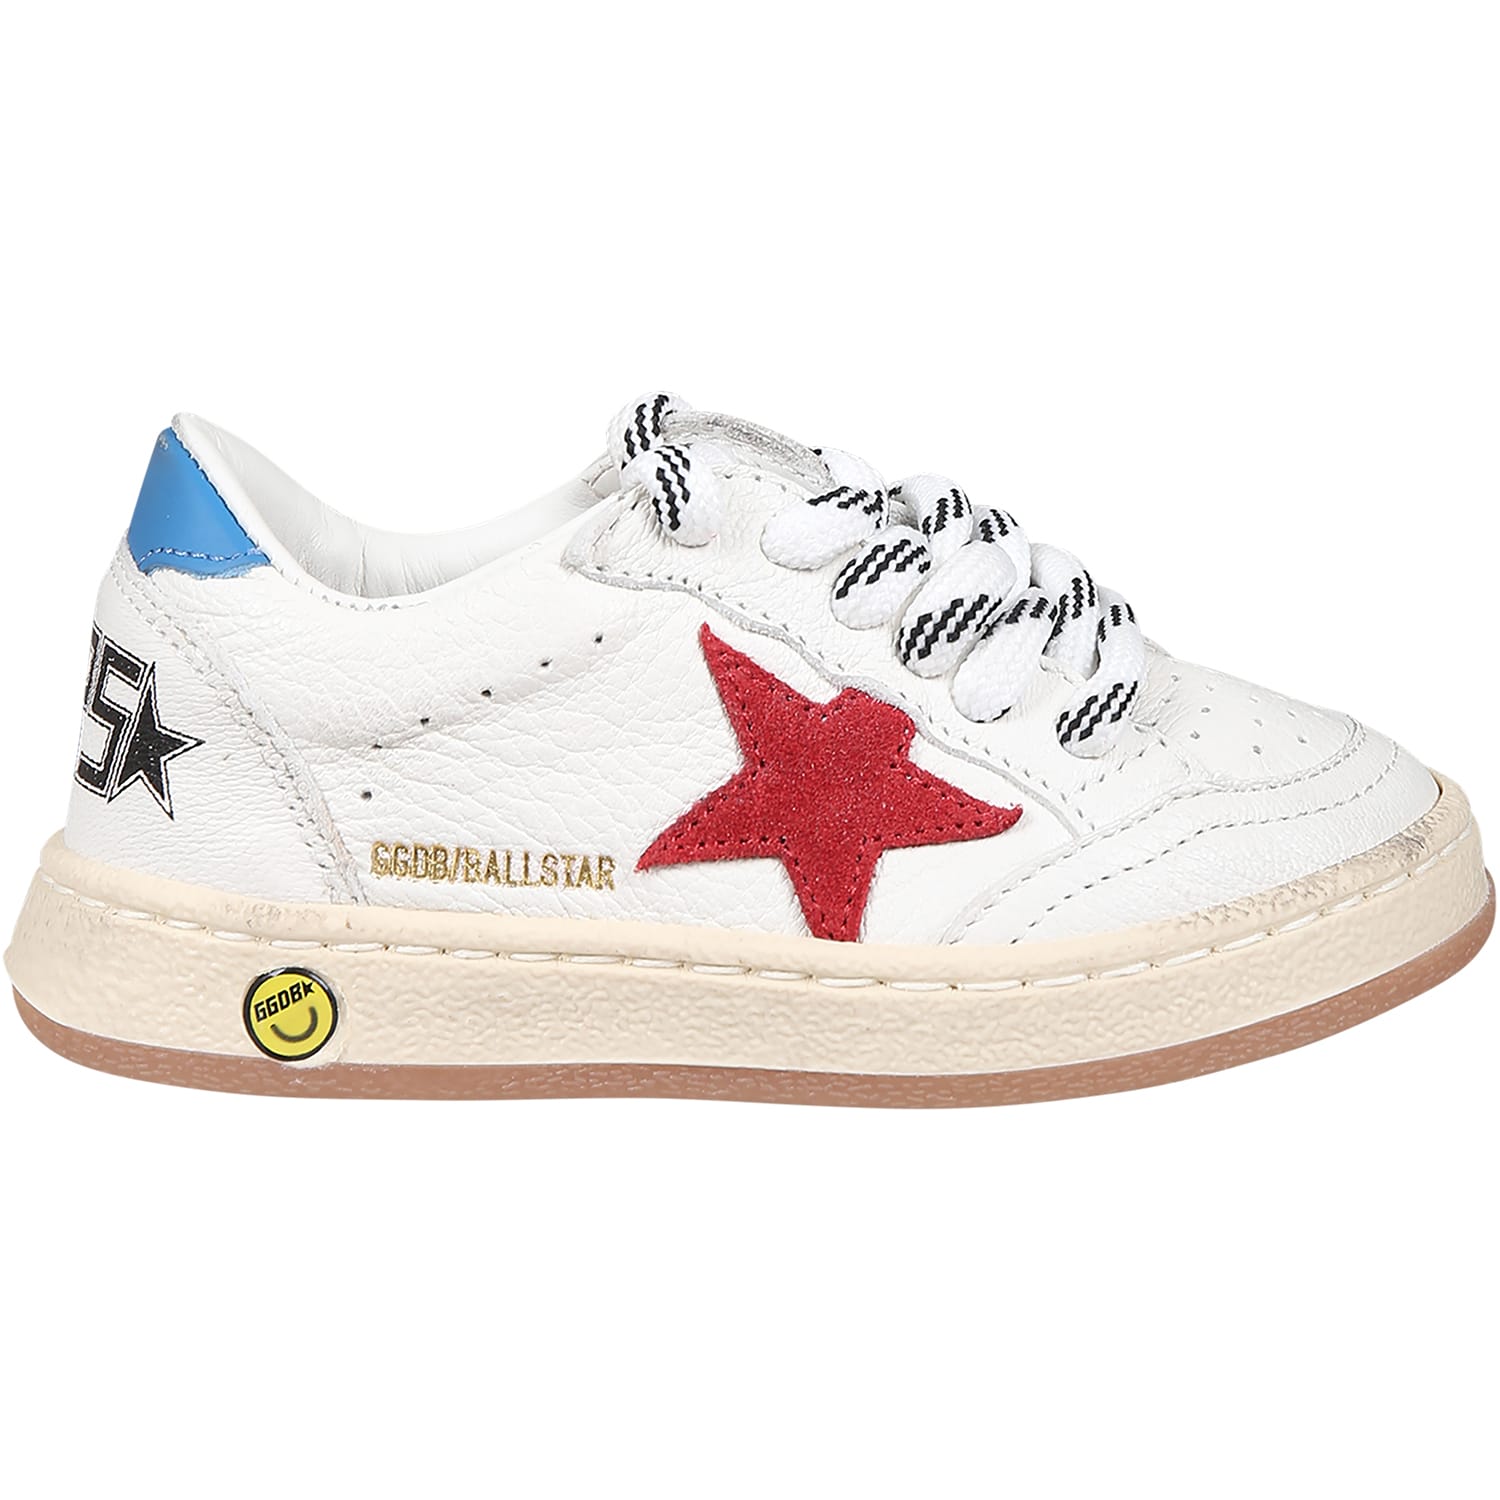 GOLDEN GOOSE WHITE BALL STAR NEW SNEAKERS FOR KIDS WITH STAR